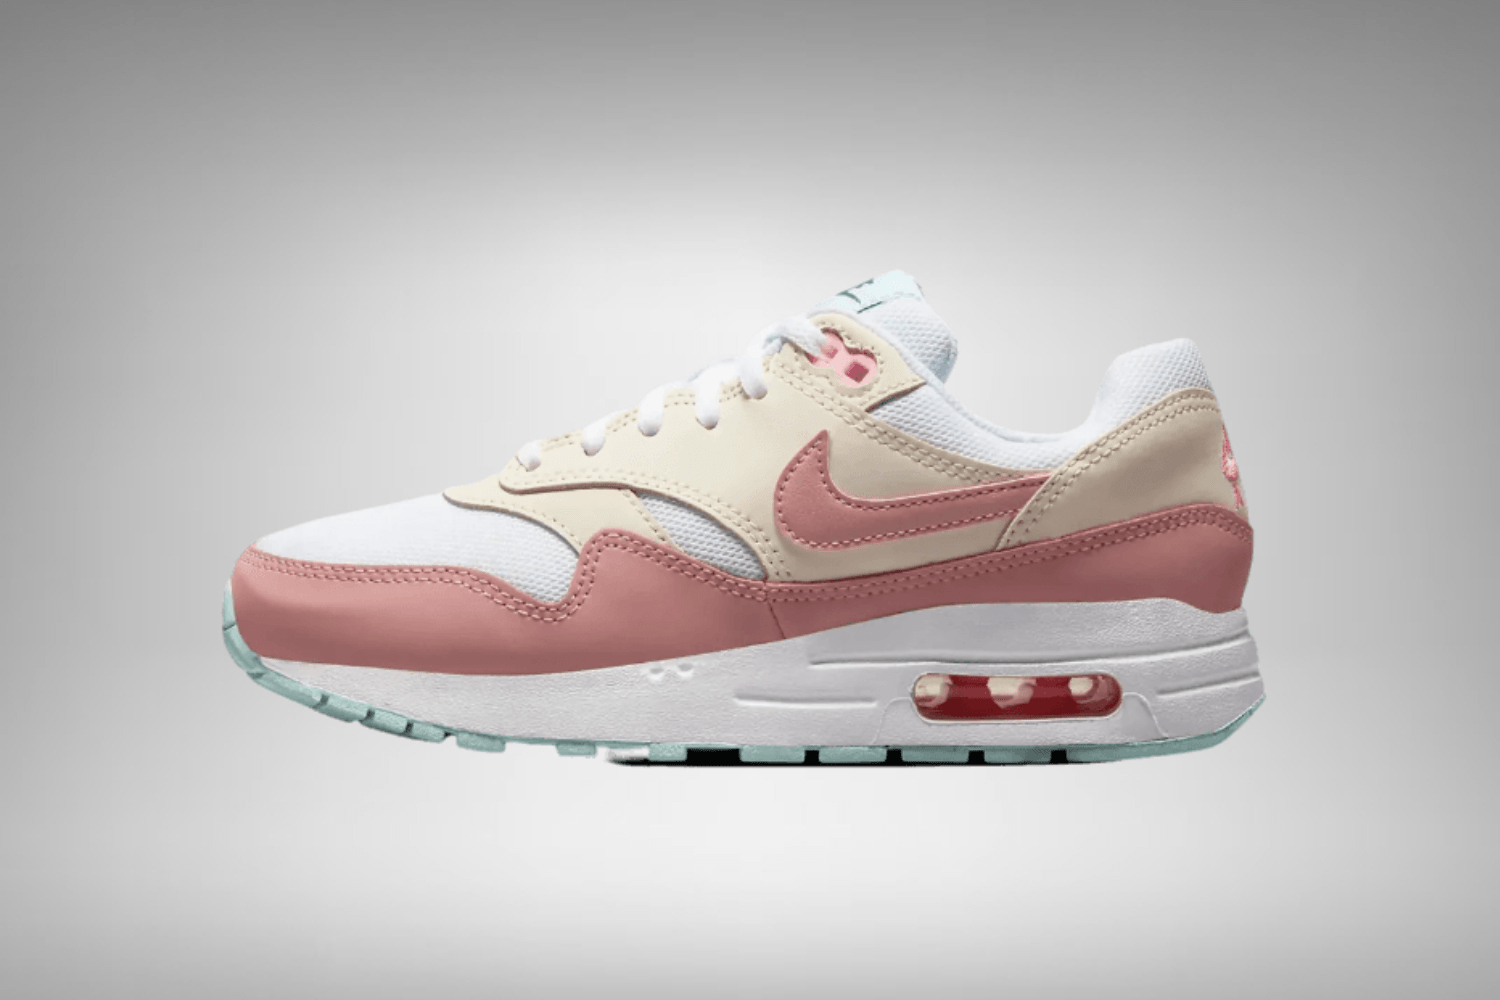 Nike reveals official images of the Air Max 1 'Ice Cream'